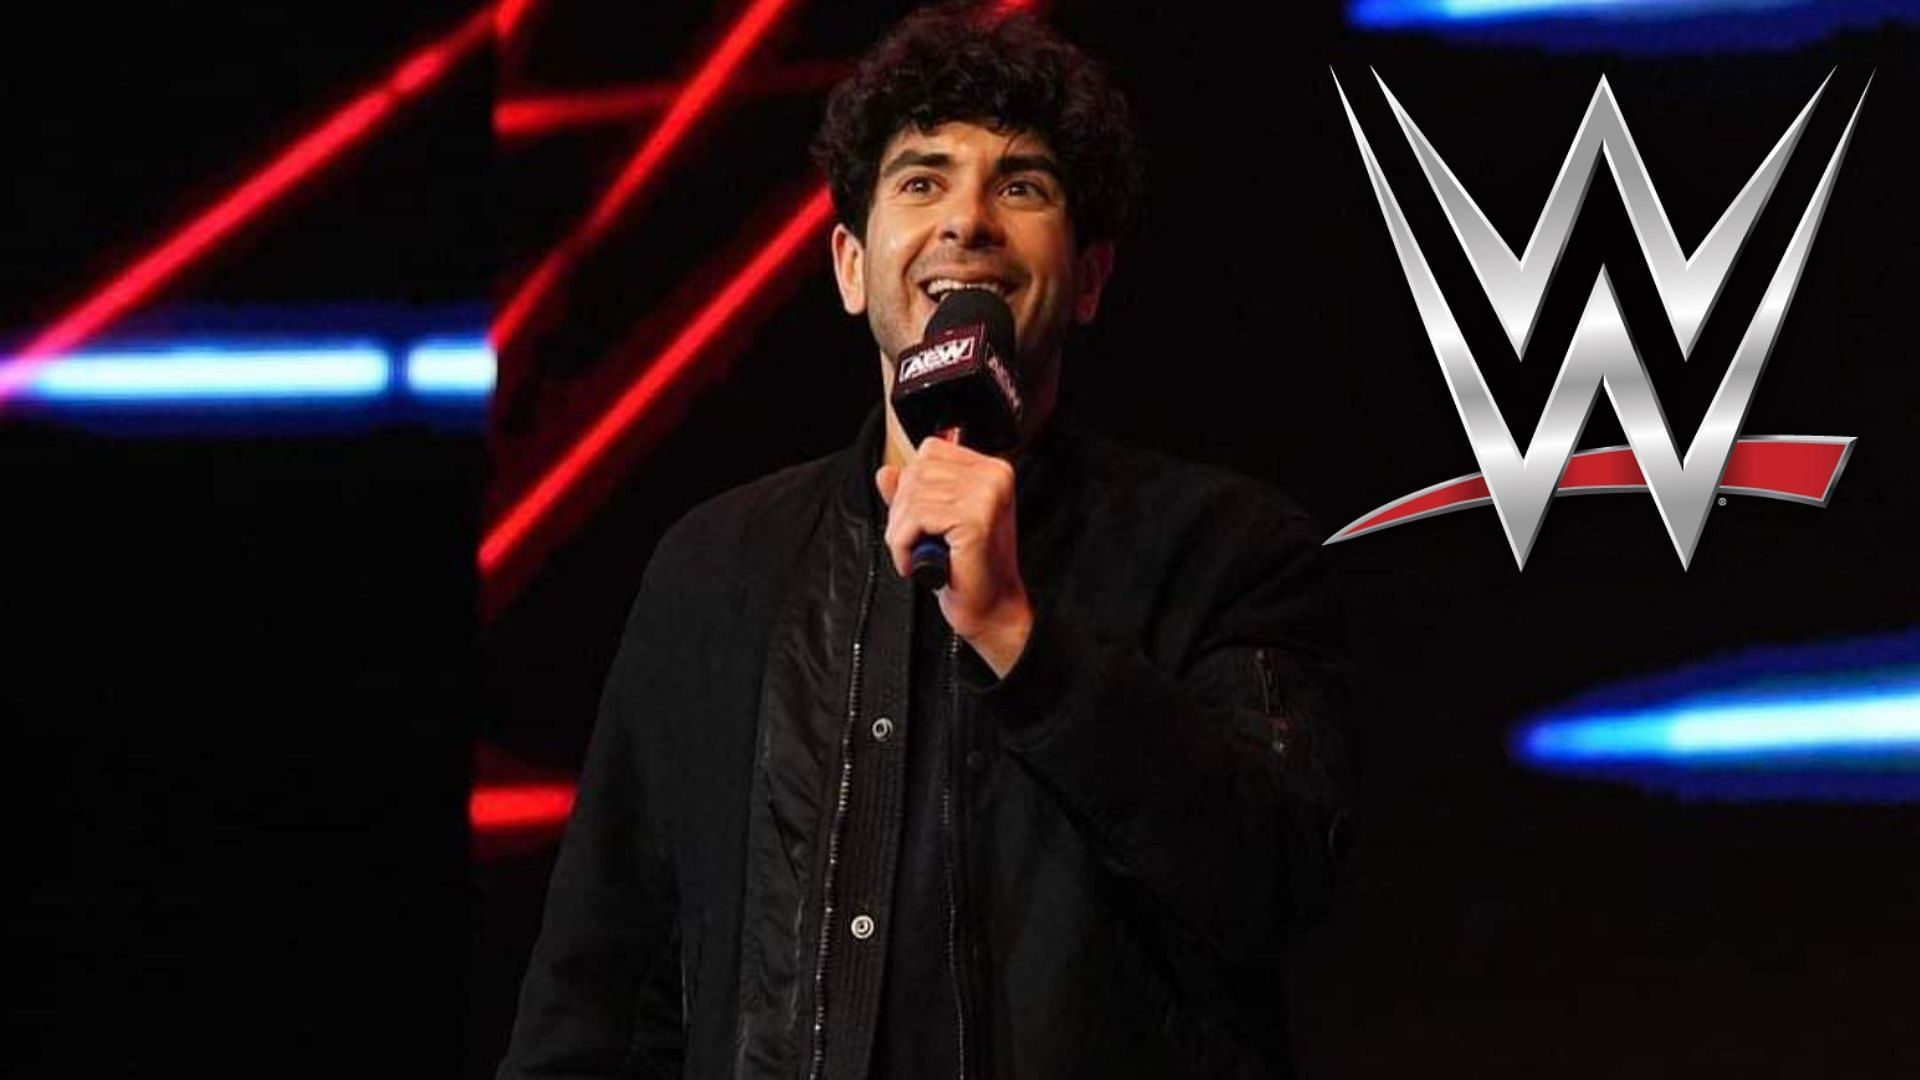 Will Tony Khan sign another WWE legend to AEW?